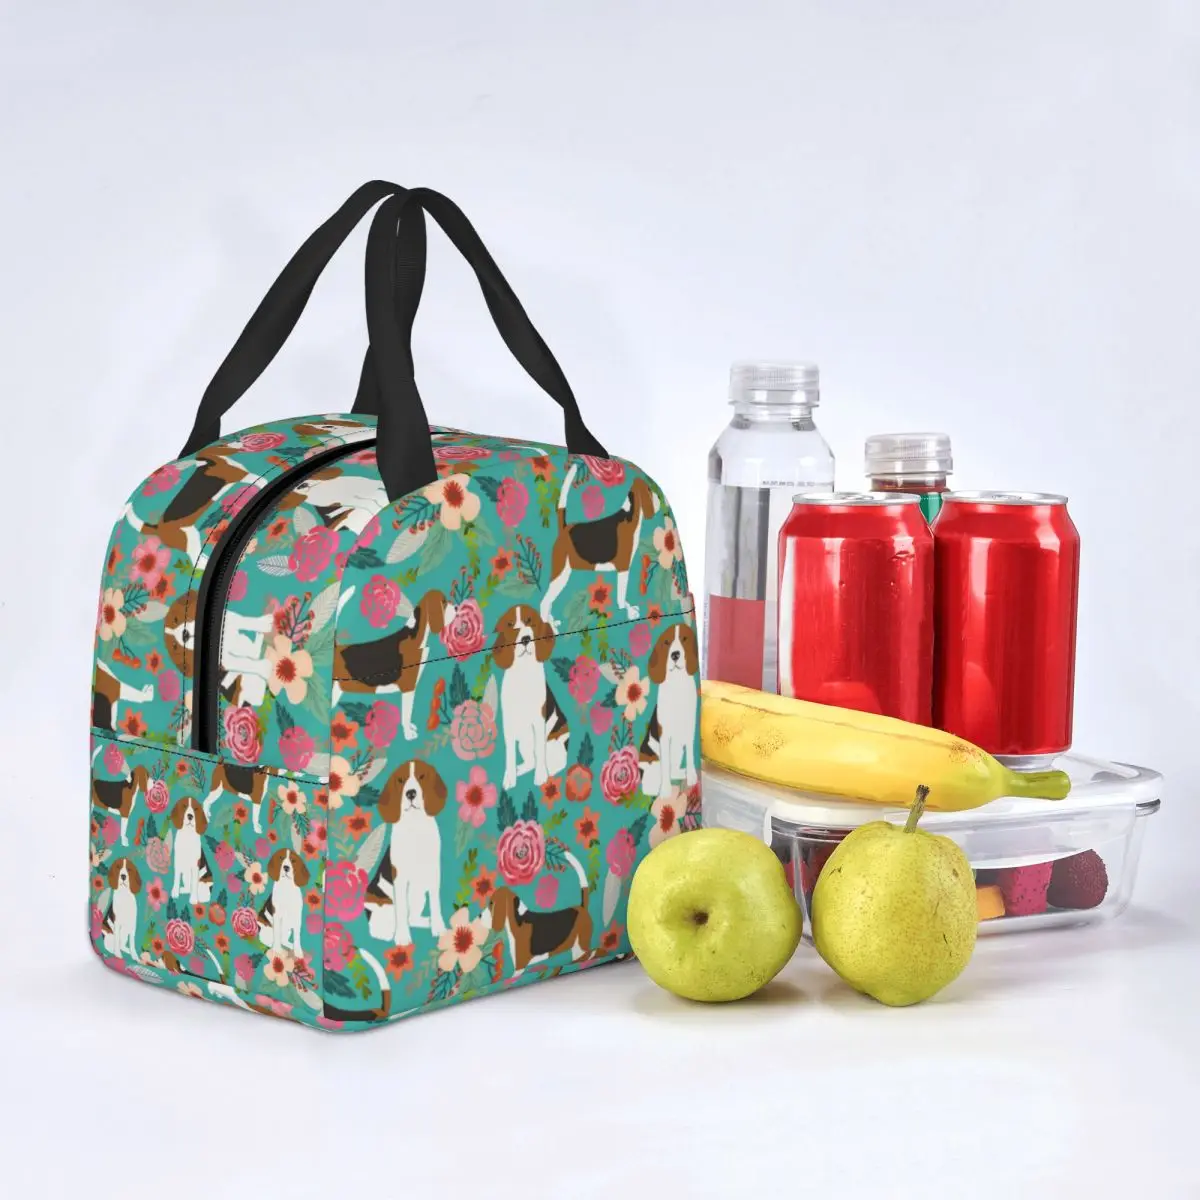 Lunch Bag for Men Women Beagle Florals Dog Insulated Cooler Waterproof Picnic Animal Oxford Lunch Box Food Bag